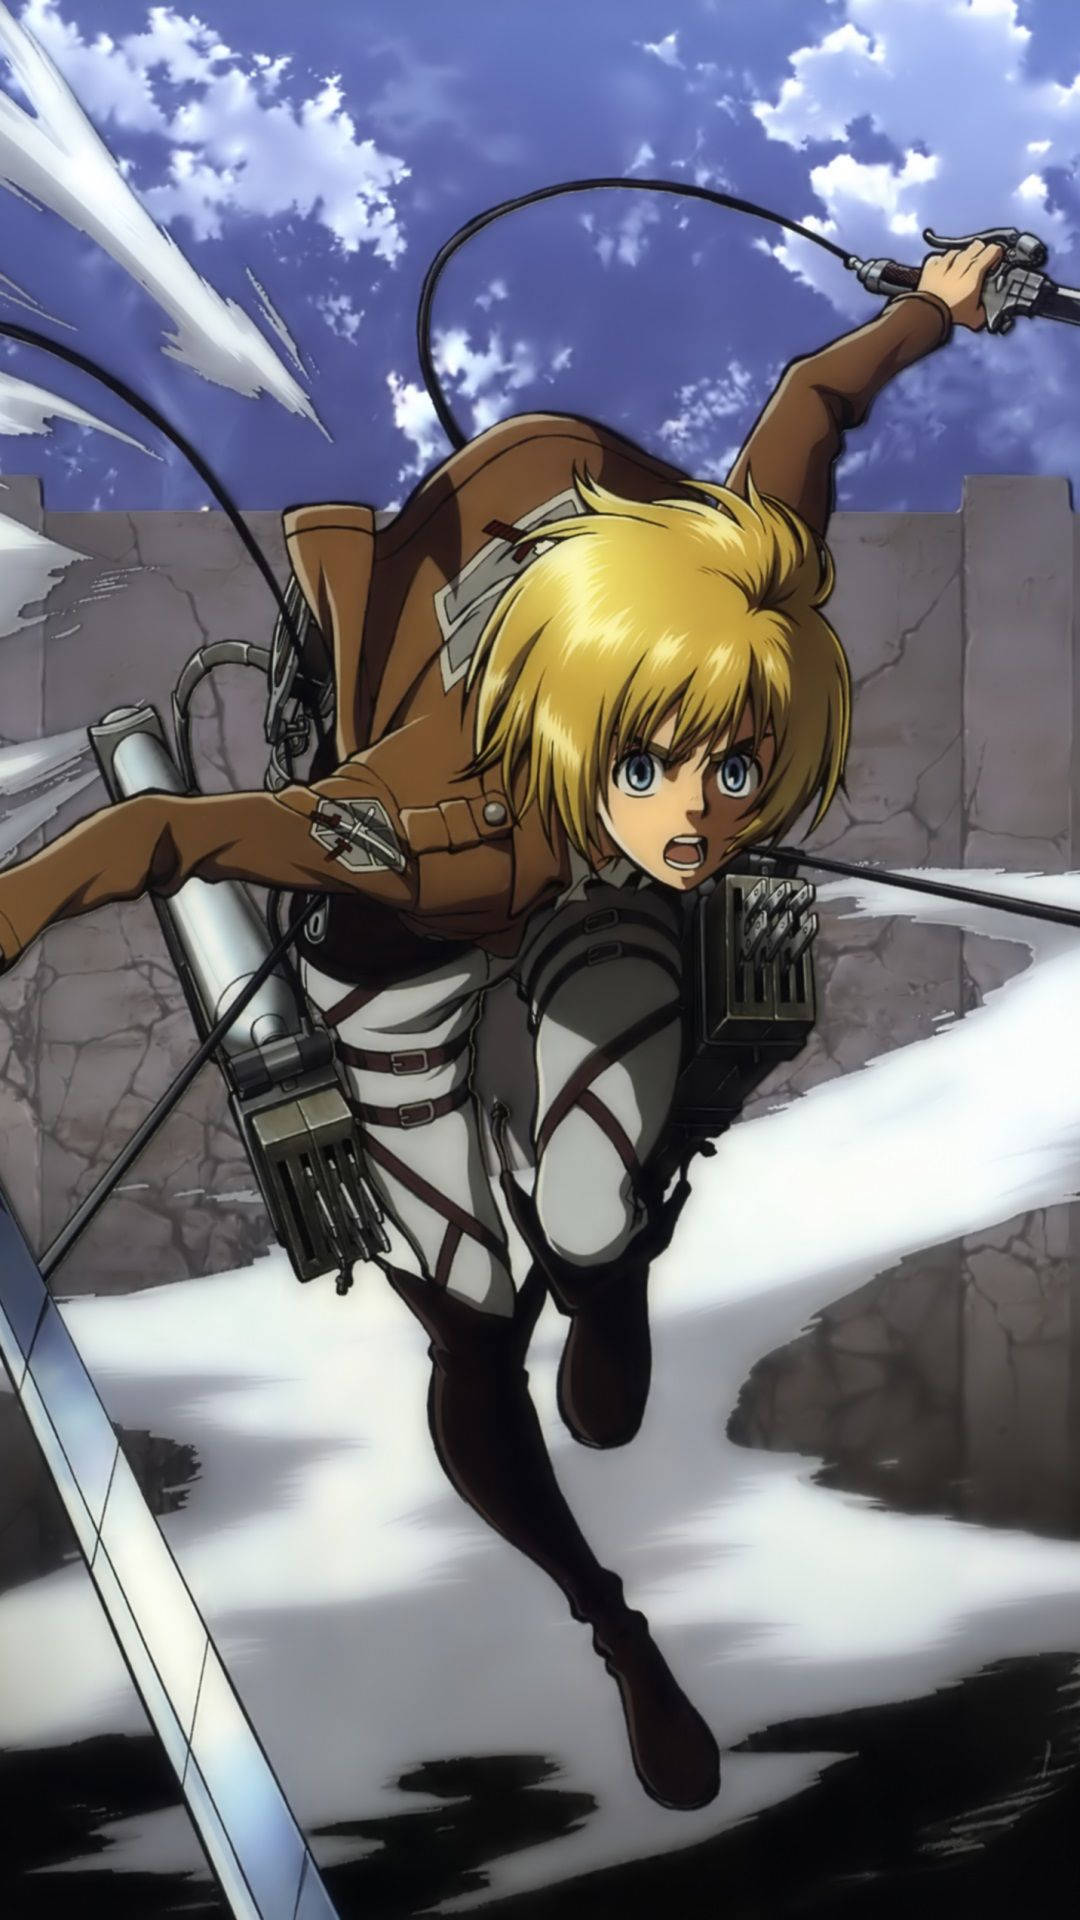 Armin Odm Gear Attack On Titan Iphone Background